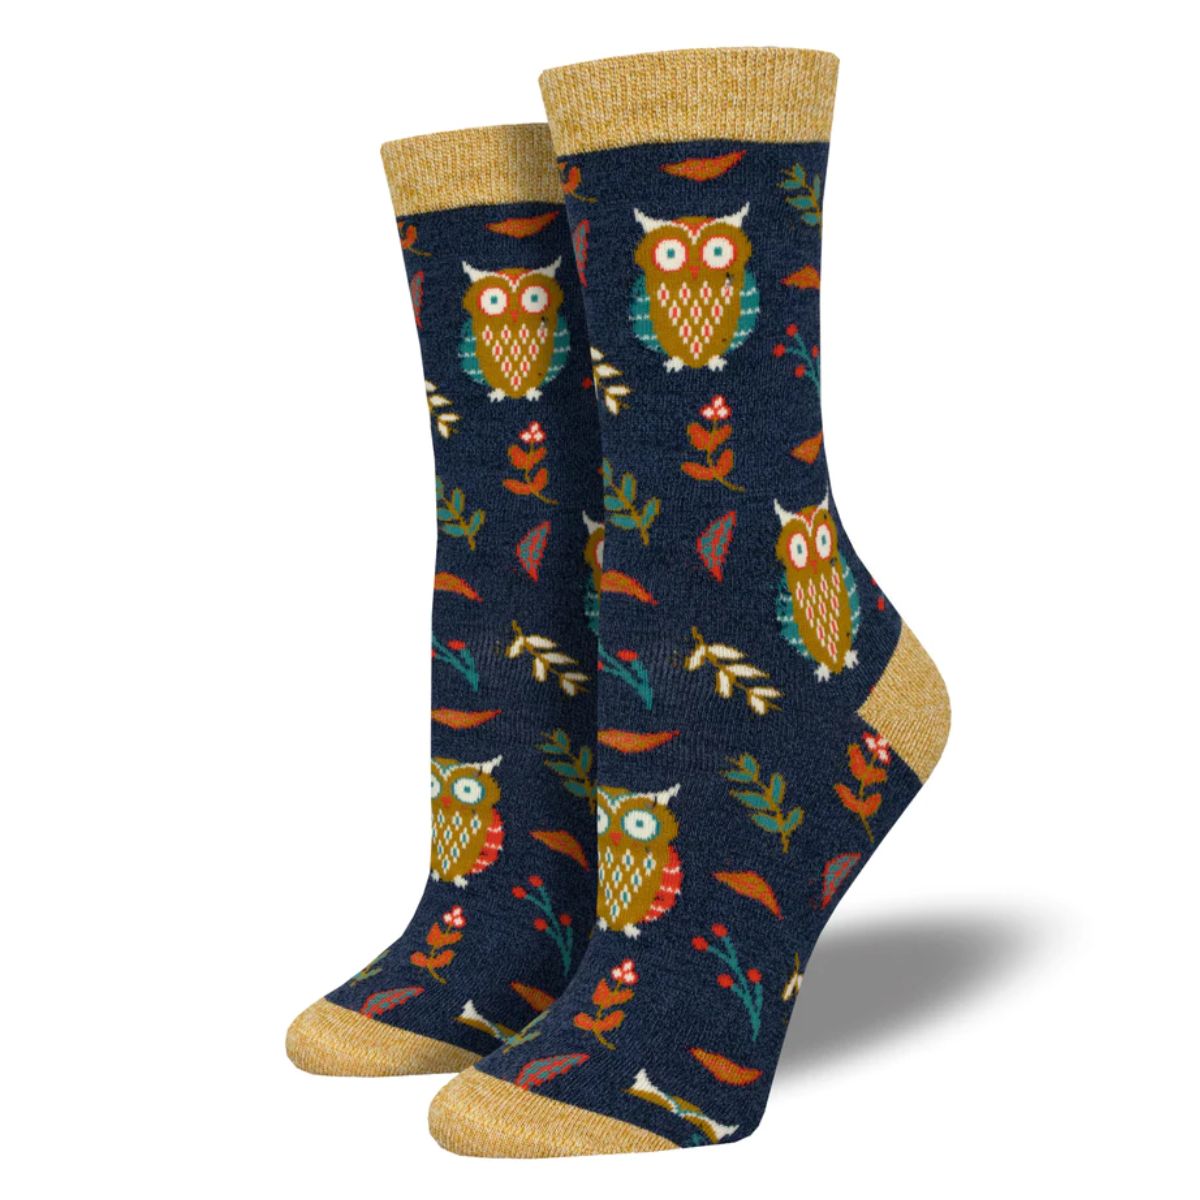 Cute hoot socks a pair of navy blue crew socks with owl and plant print